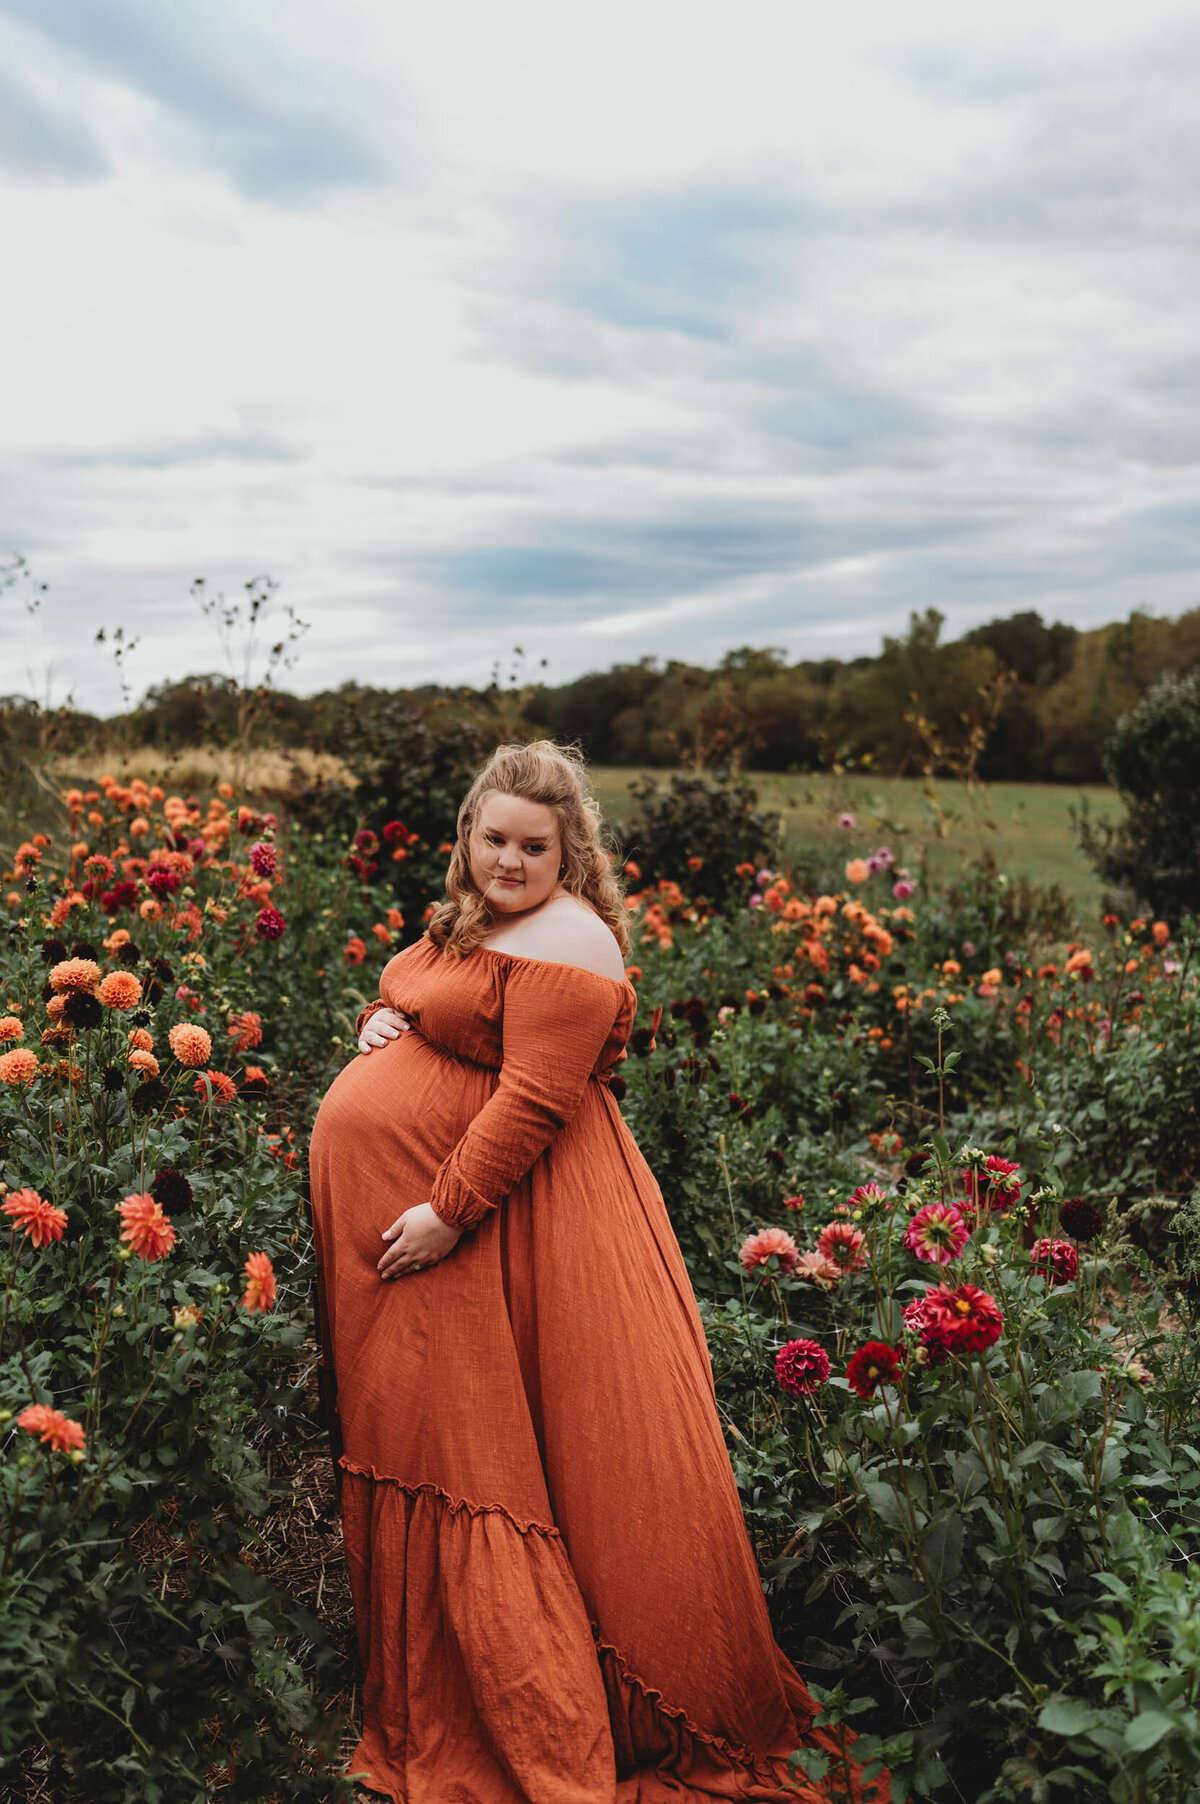 Kansas city outdoor maternity session in flowers2